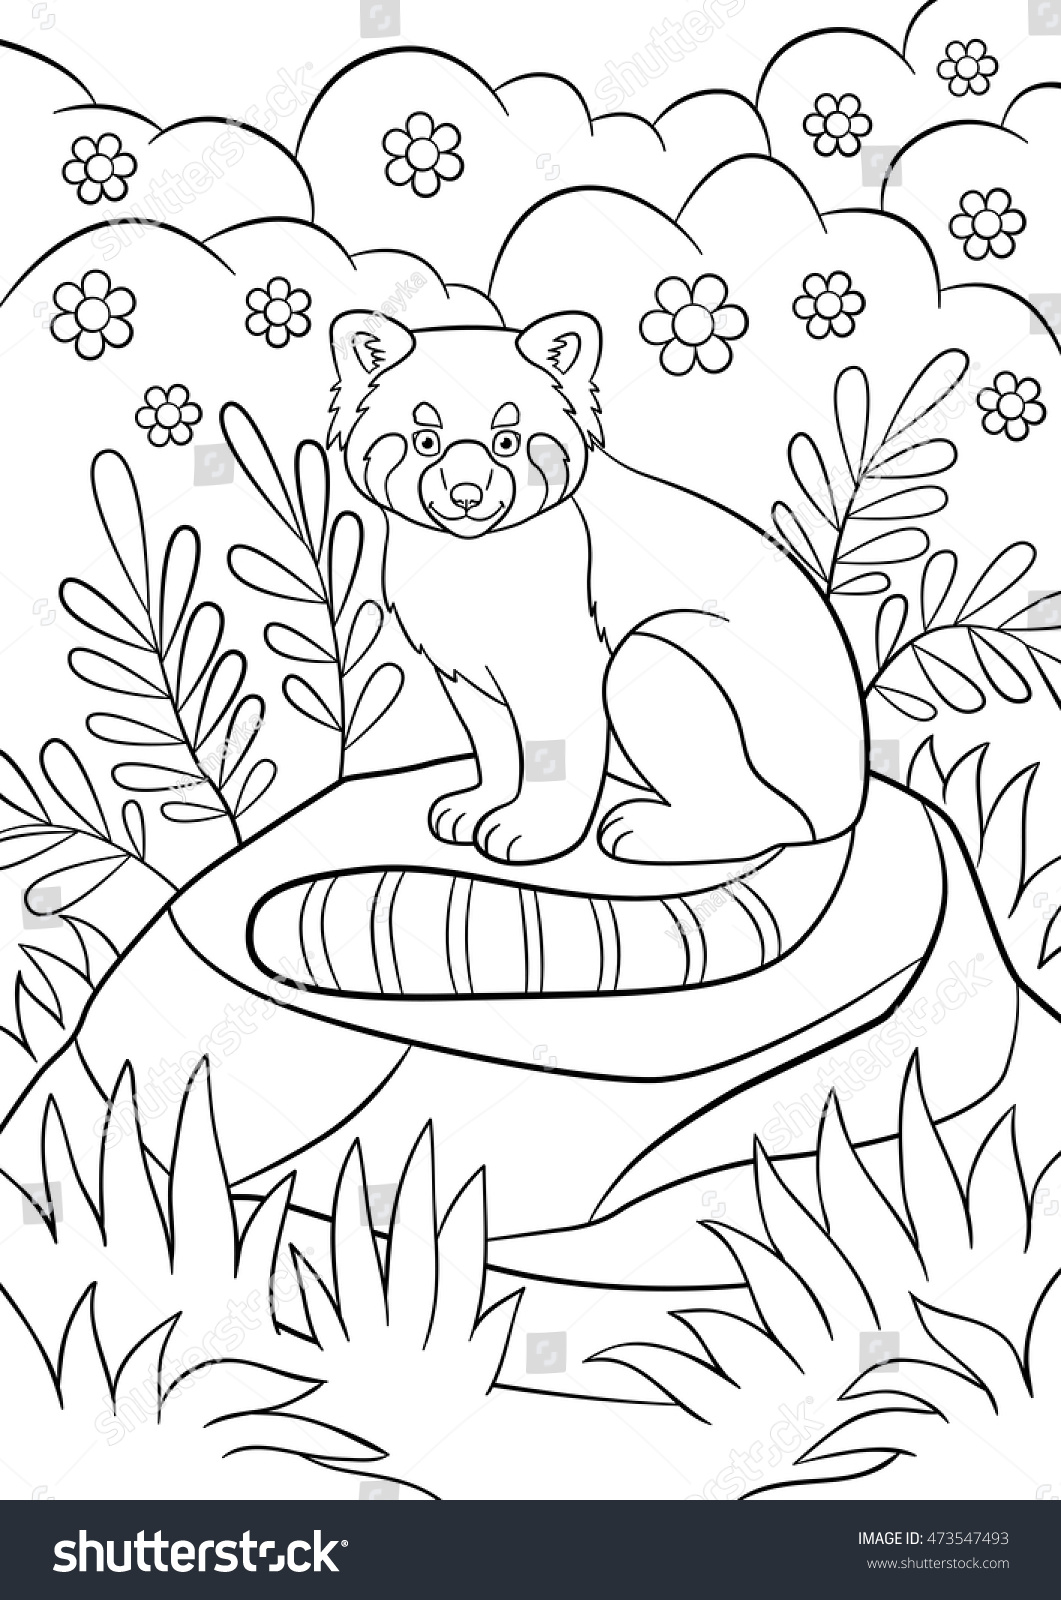 Coloring pages little cute red panda stock vector royalty free